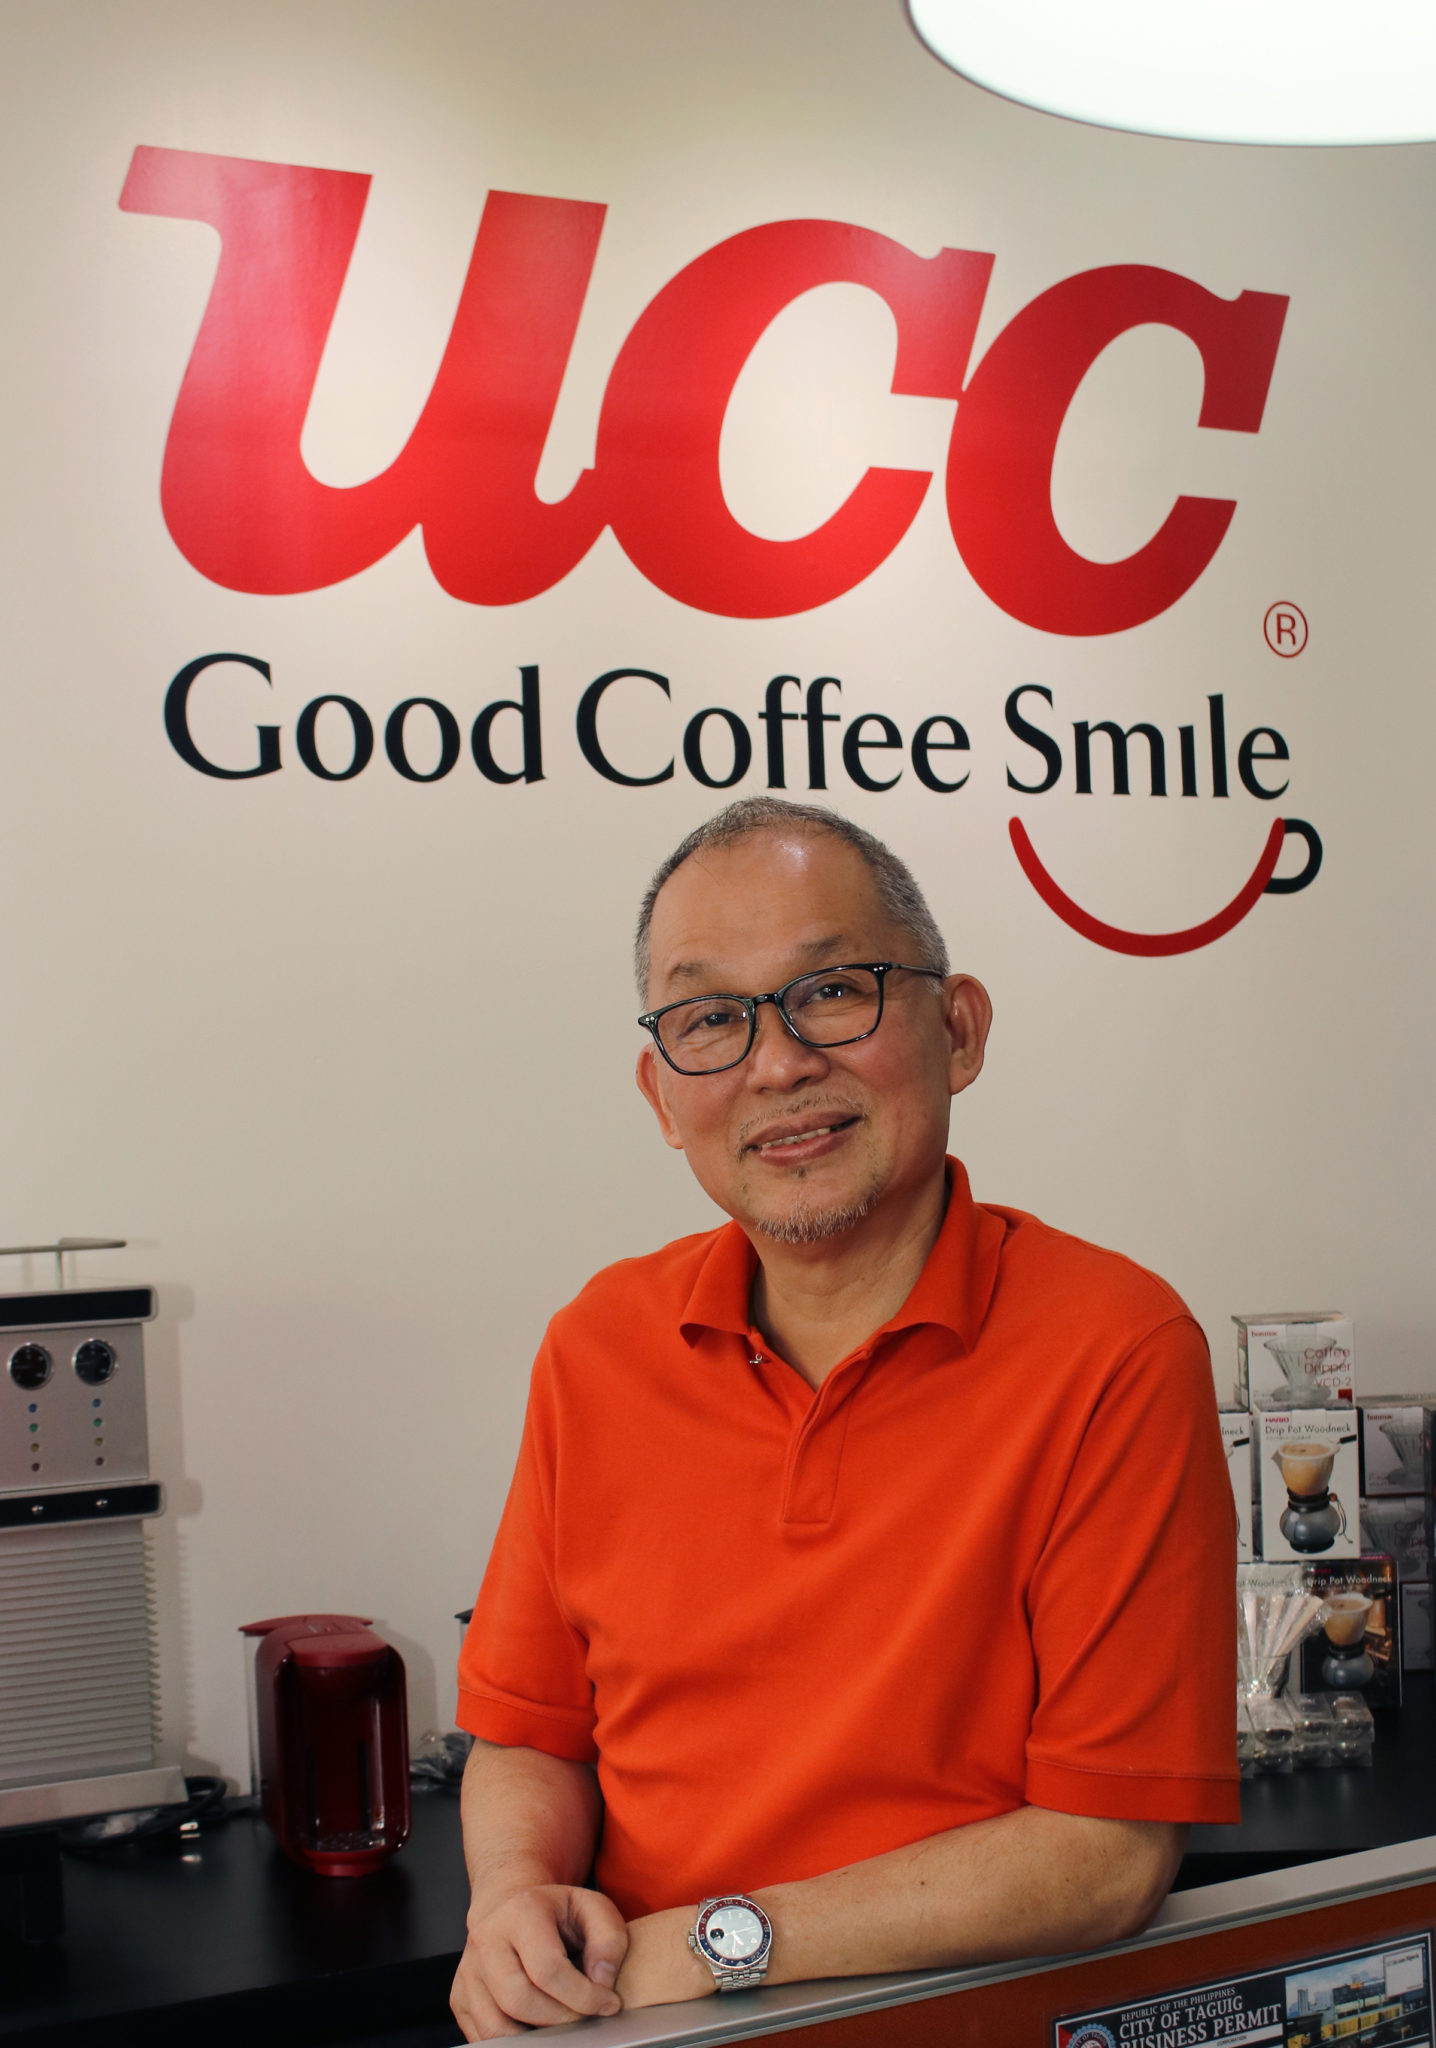 Hubert Young started his career in food and beverage by handling the coffee section of his family's business before setting his sights on franchises from Japan